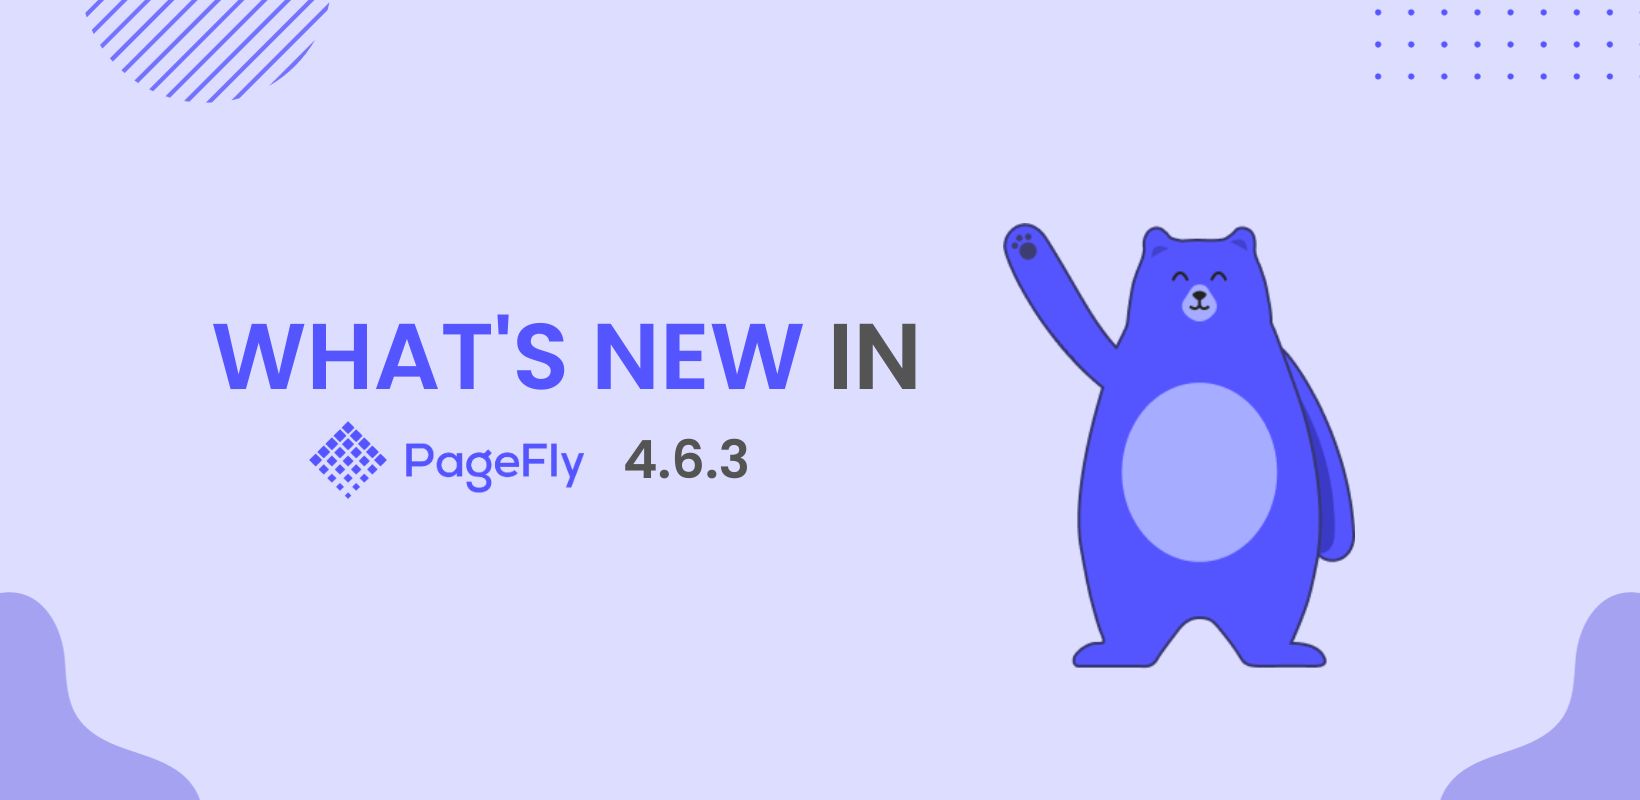 PageFly 4.6.3: Empower Your Store. Boost Sales. And Enrich Customer Engagement.